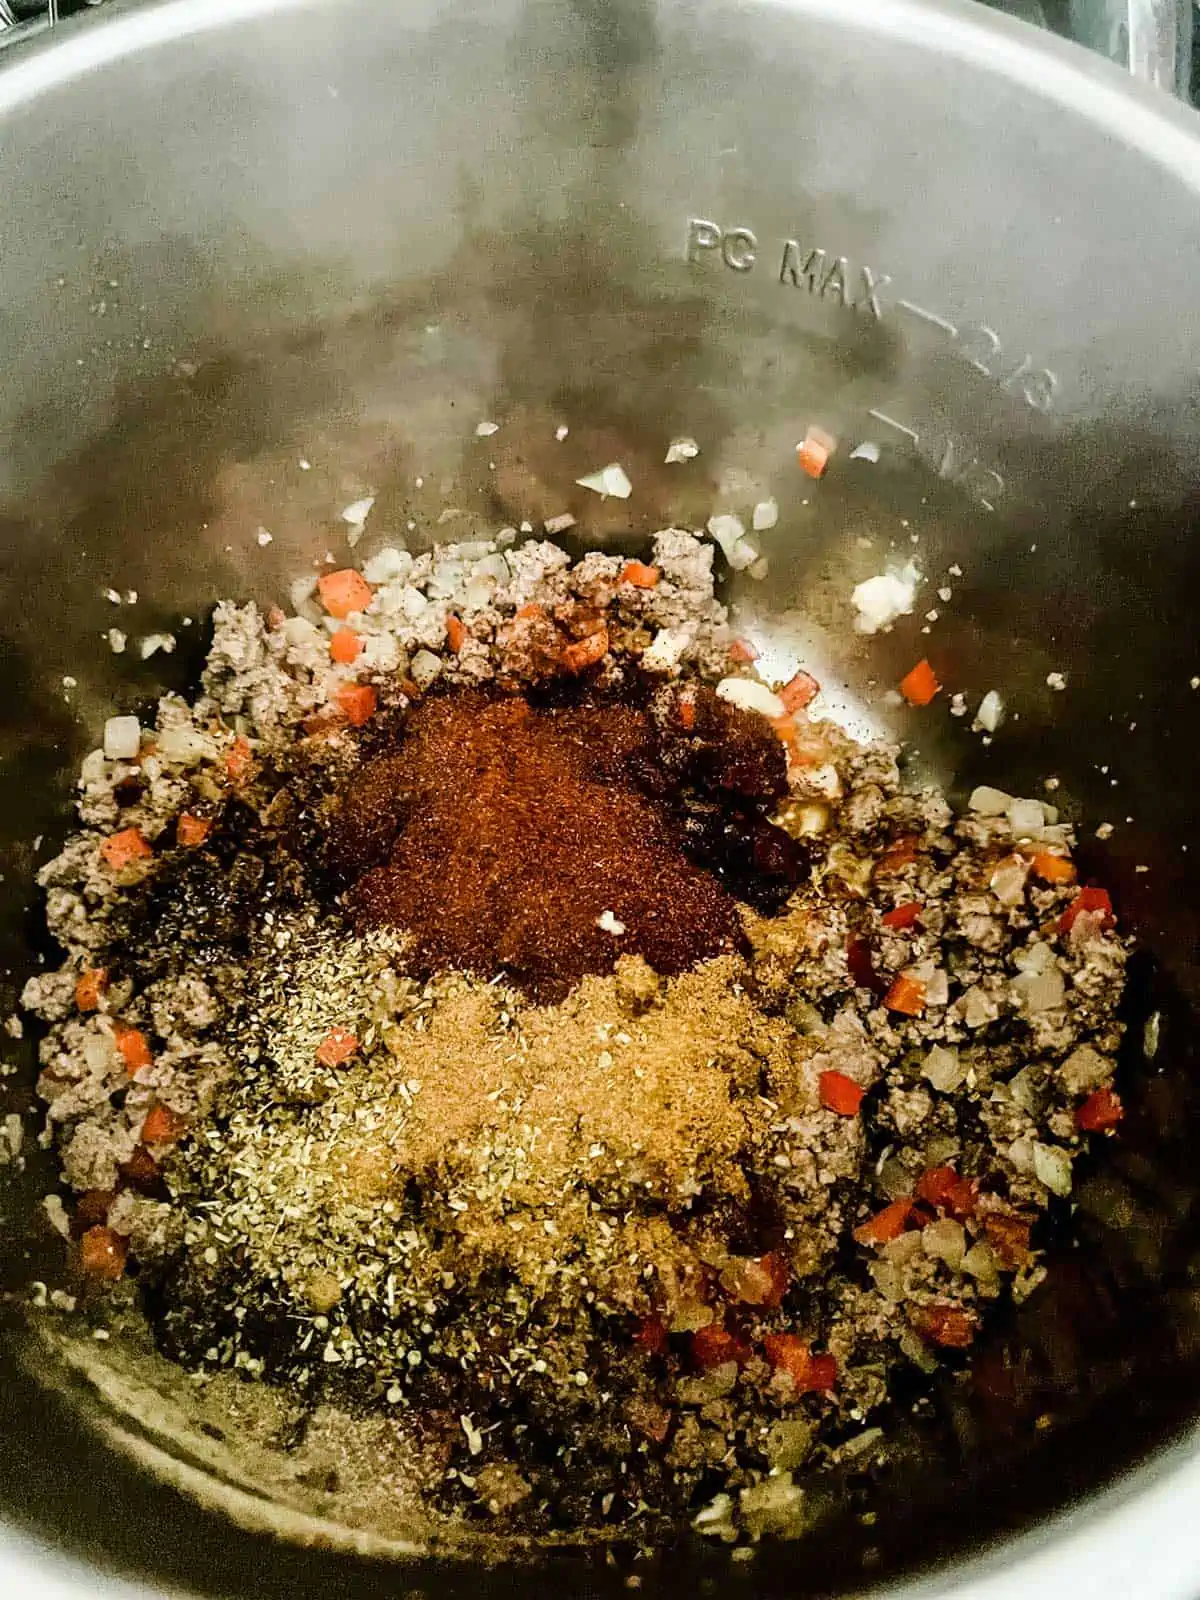 Seasonings that have been dumped on top of ground beef, onion, and red pepper in an Instant Pot.